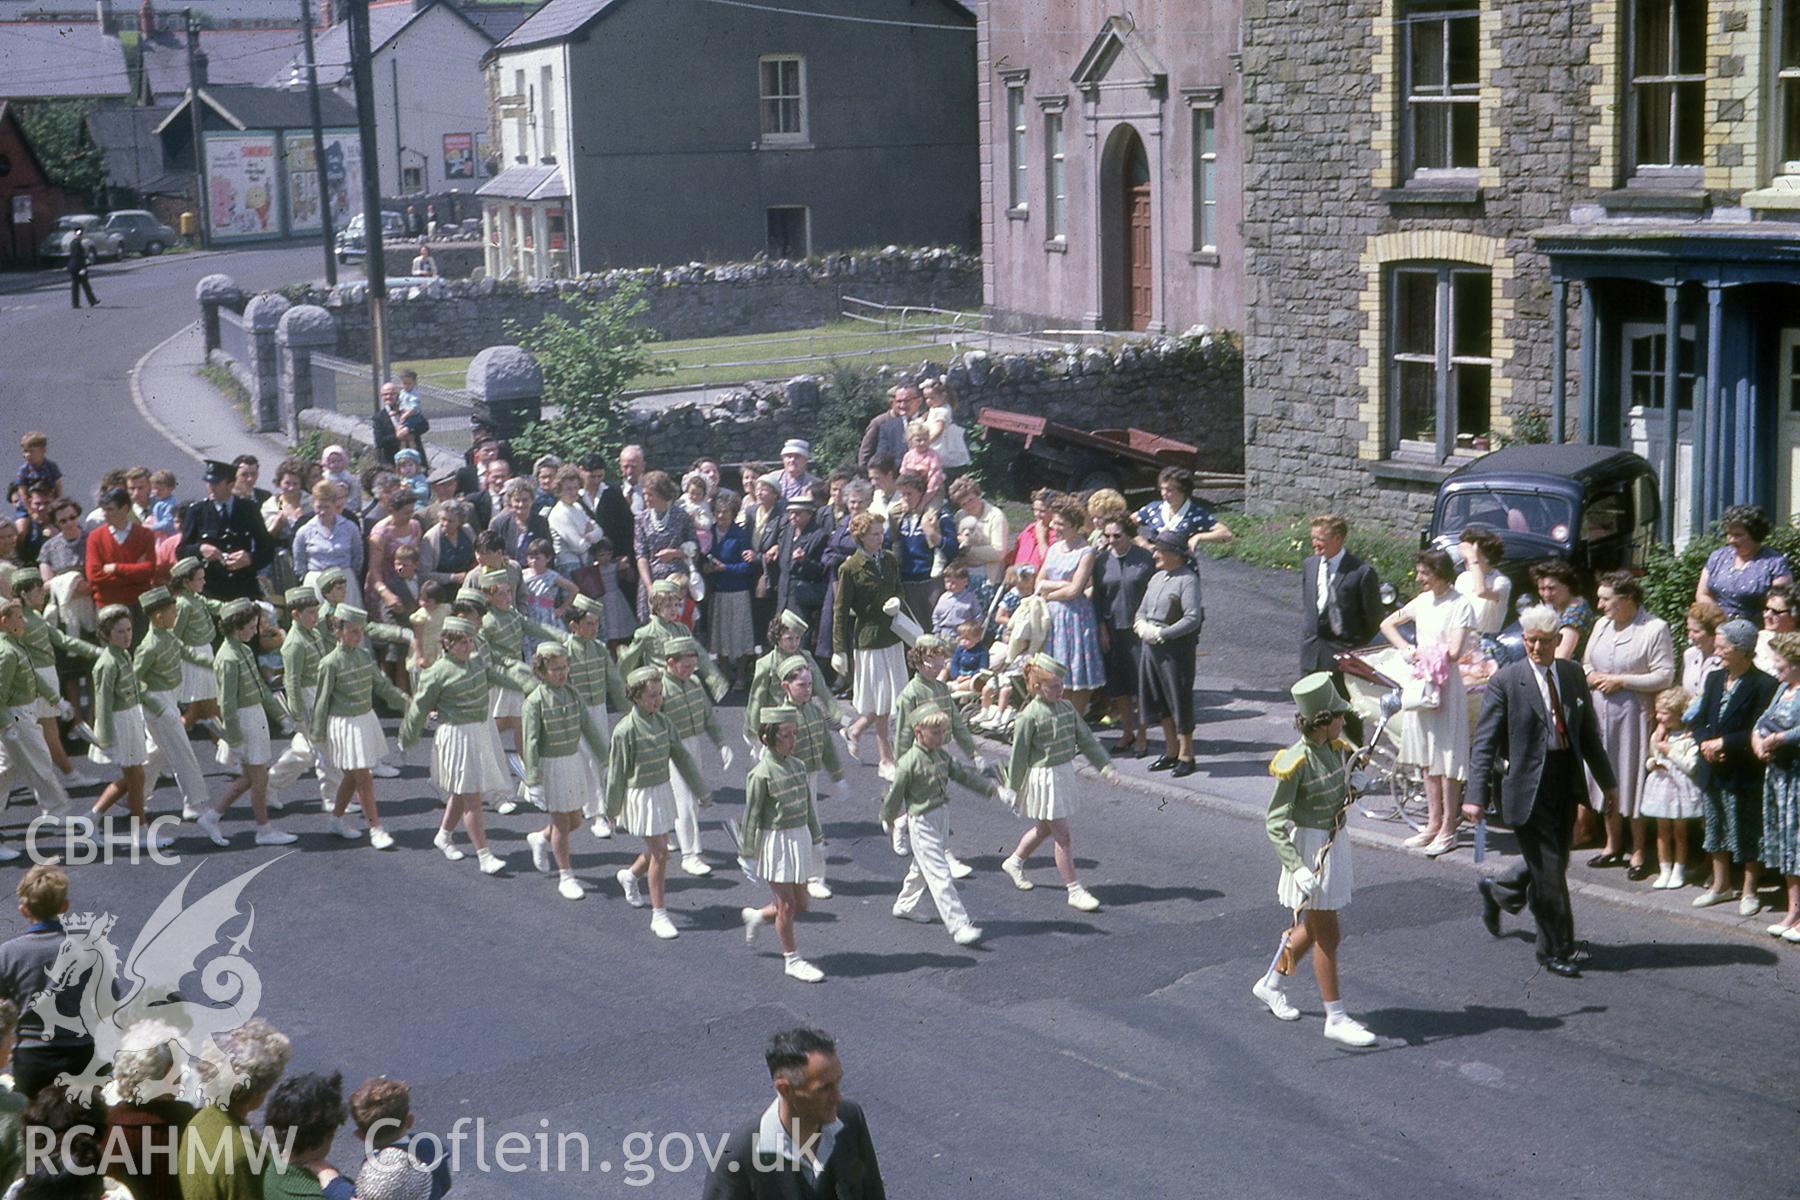 View of carnival scene in Llandybie scanned from a photo taken by Dylan Rees, 1975-1983